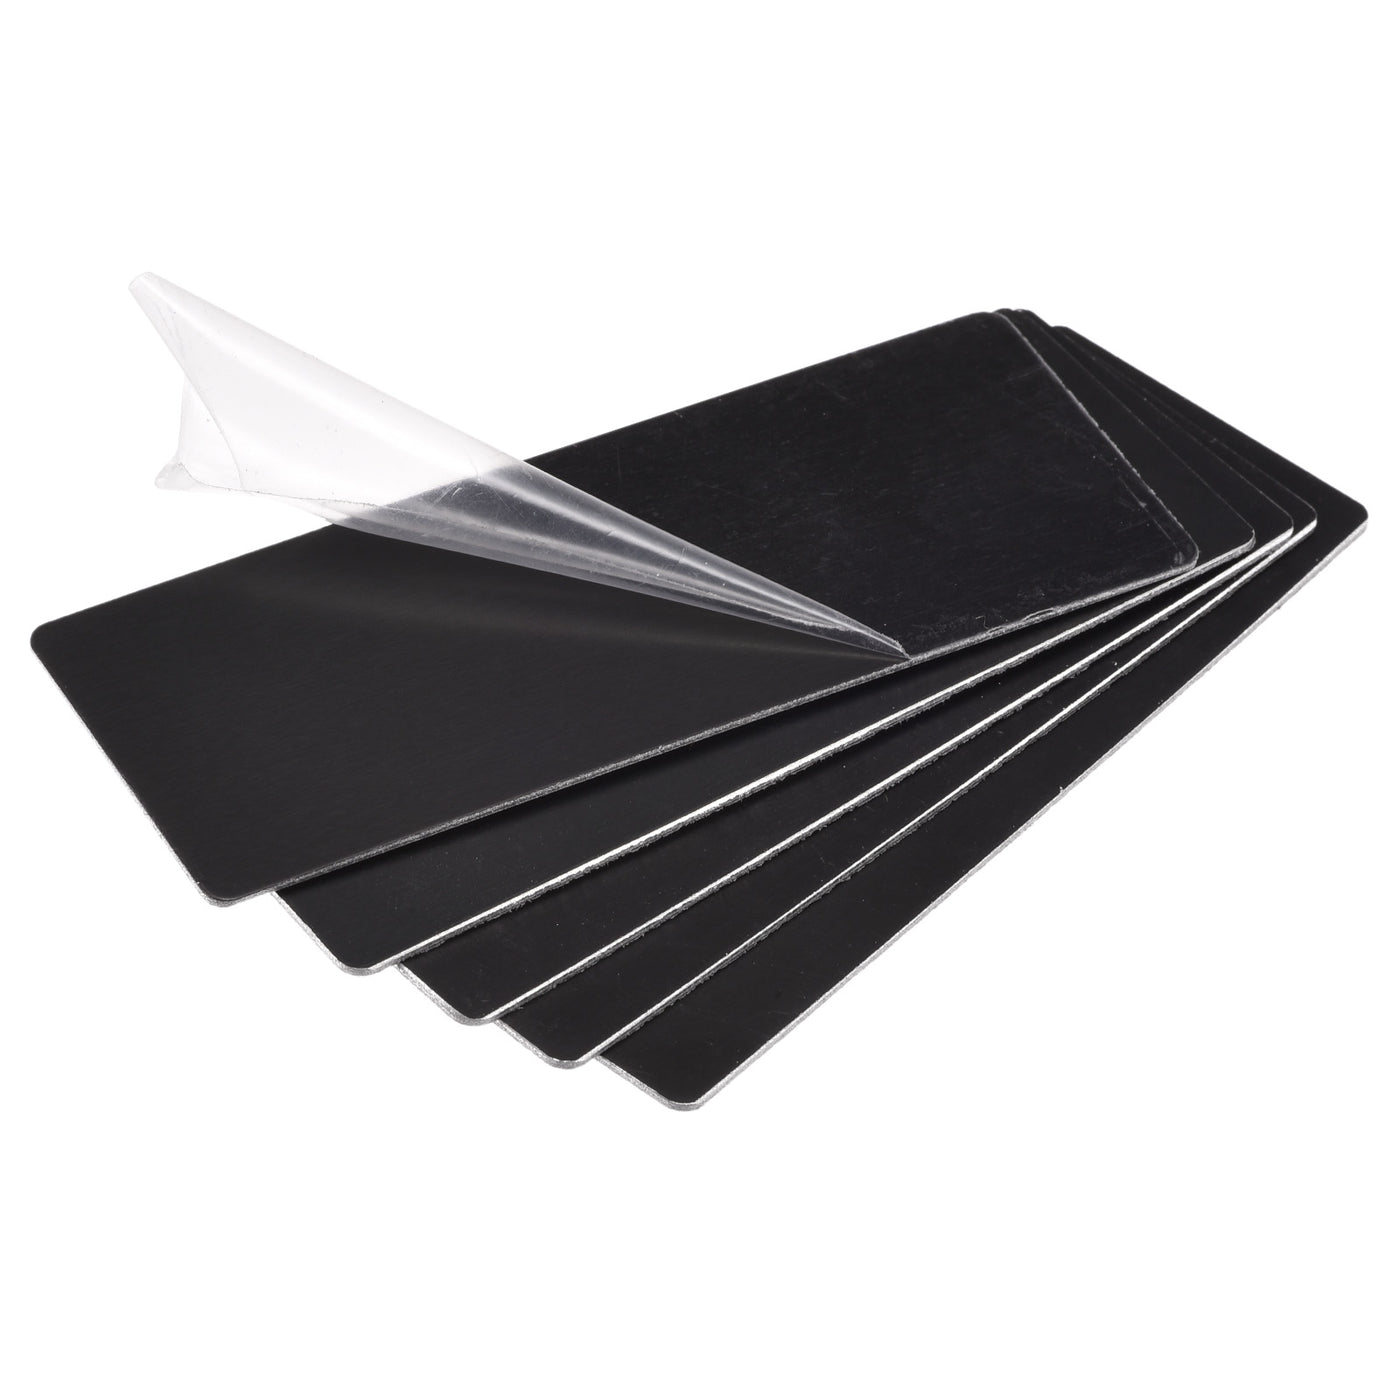 Uxcell Uxcell Blank Metal Card 80mm x 30mm x 0.8mm Anodized Aluminum Plate Black 5 Pcs